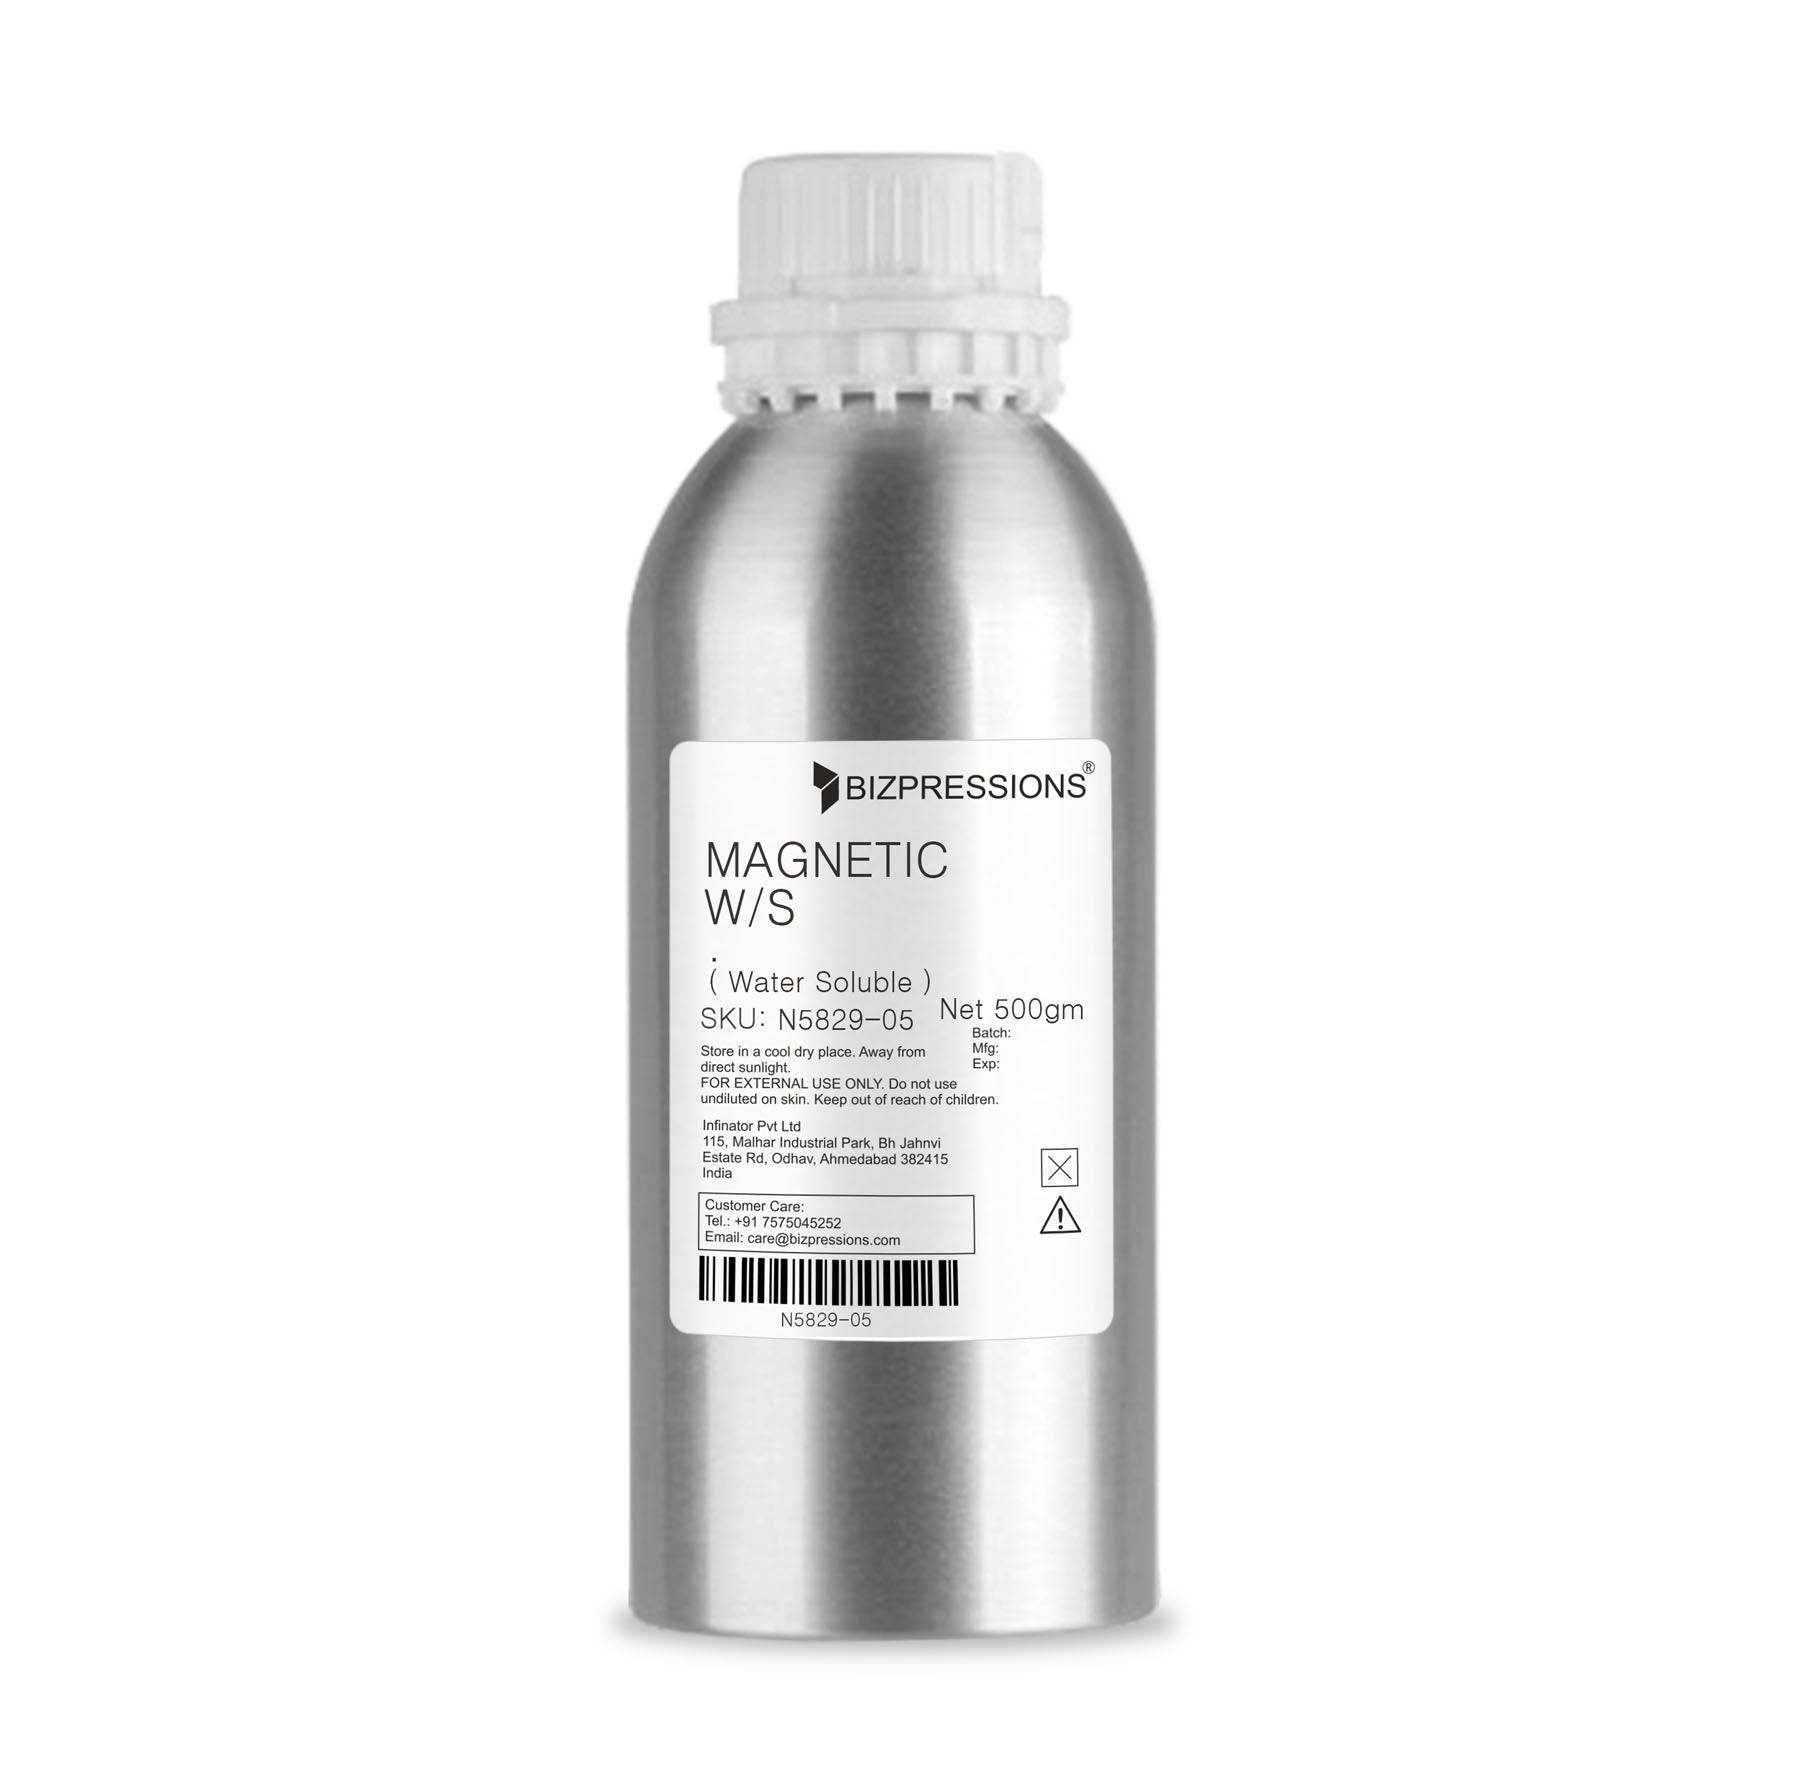 MAGNETIC W/S - Fragrance ( Water Soluble ) - 500 gm